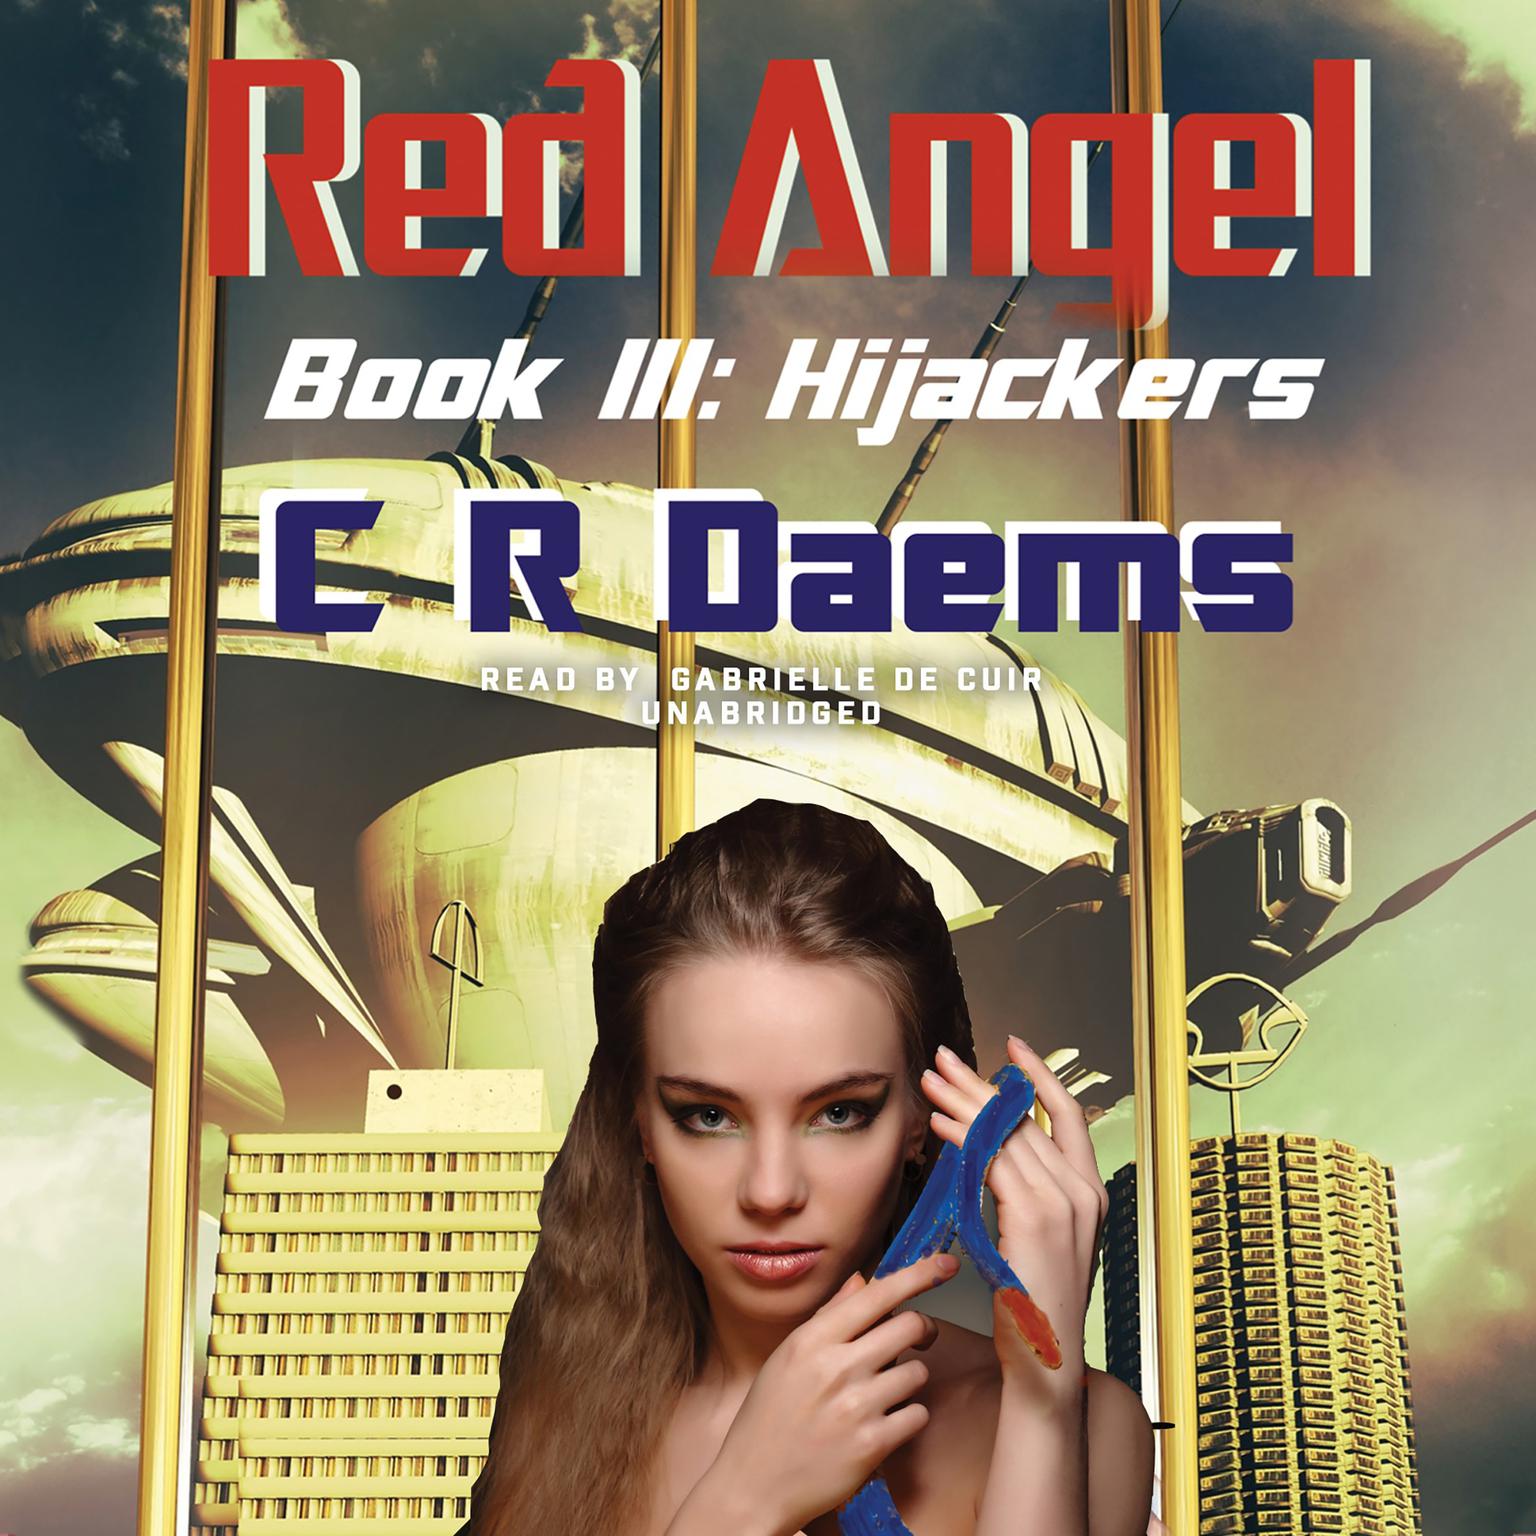 Hijackers Audiobook, by C. R. Daems